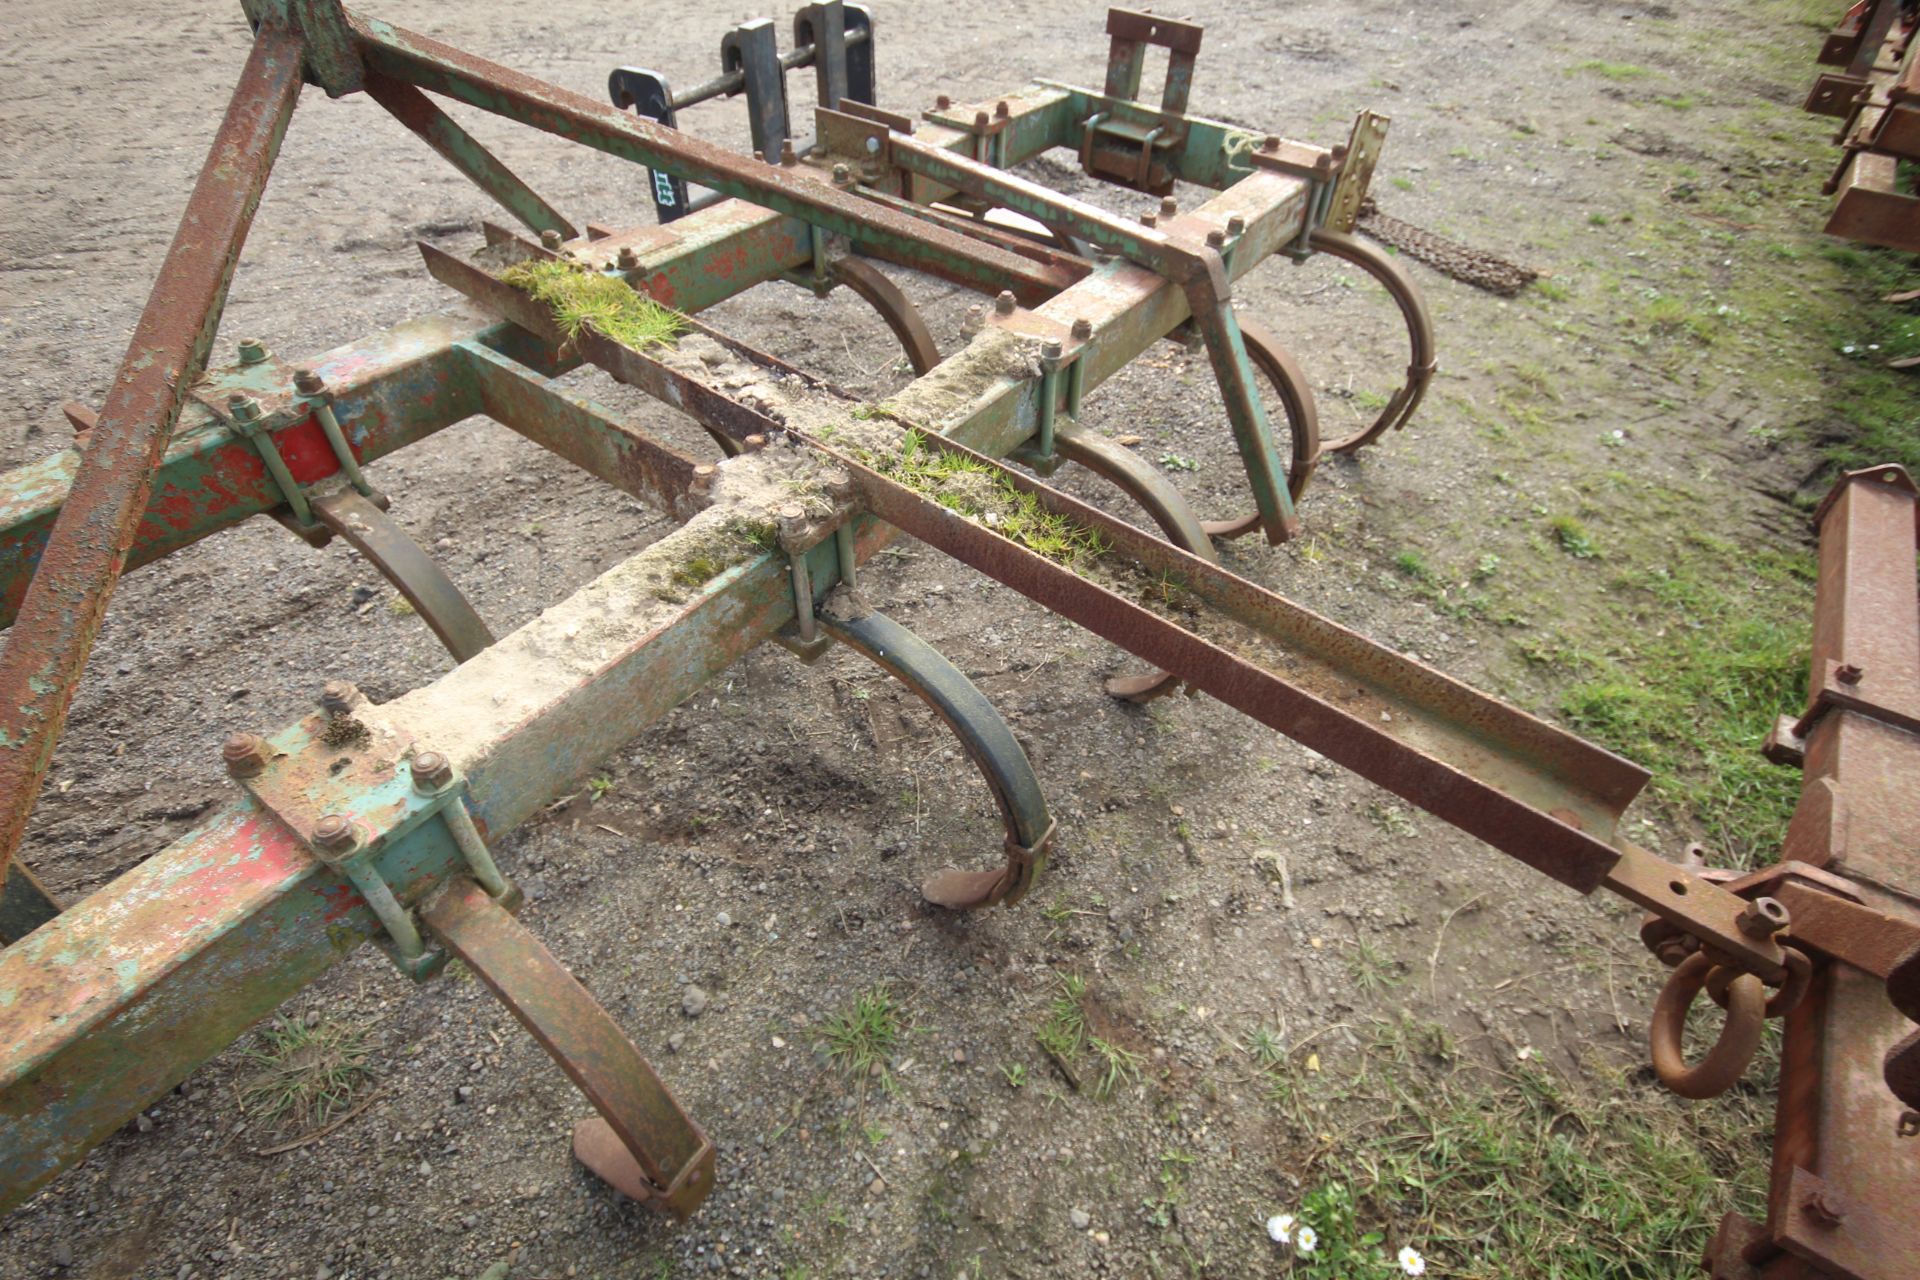 4m sprung tine cultivator. - Image 10 of 15